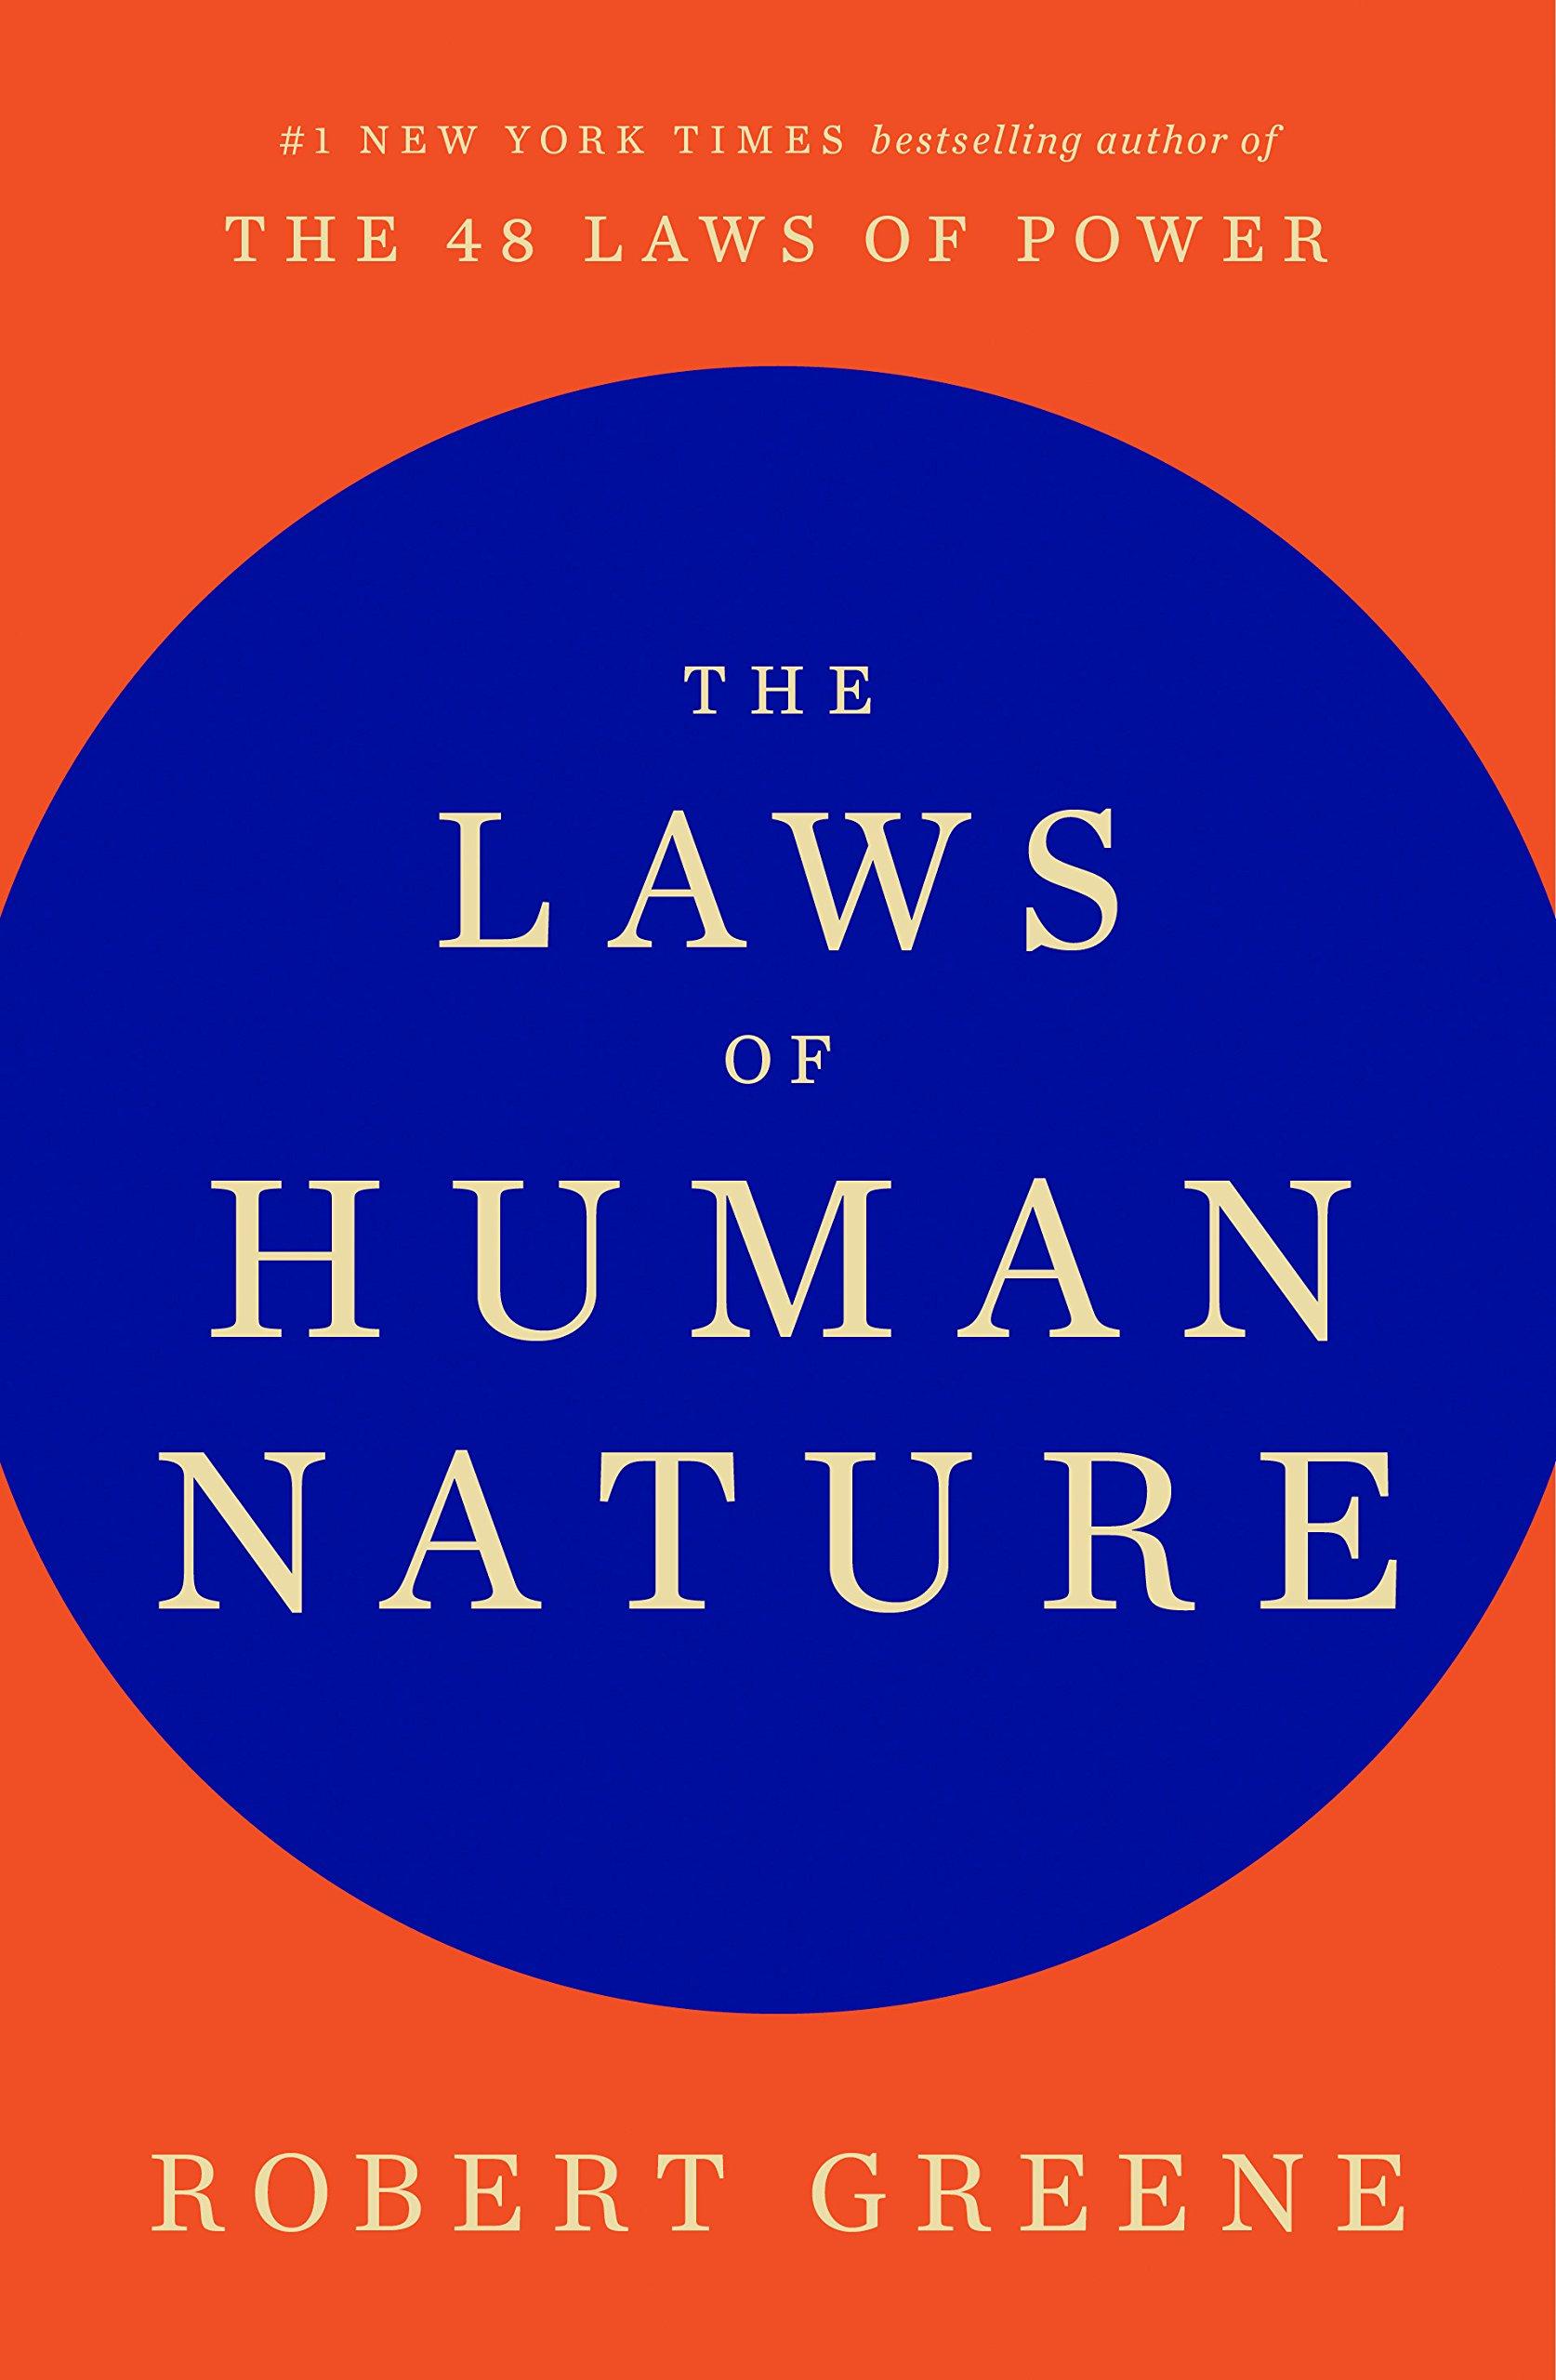 LAWS OF HUMAN NATURE